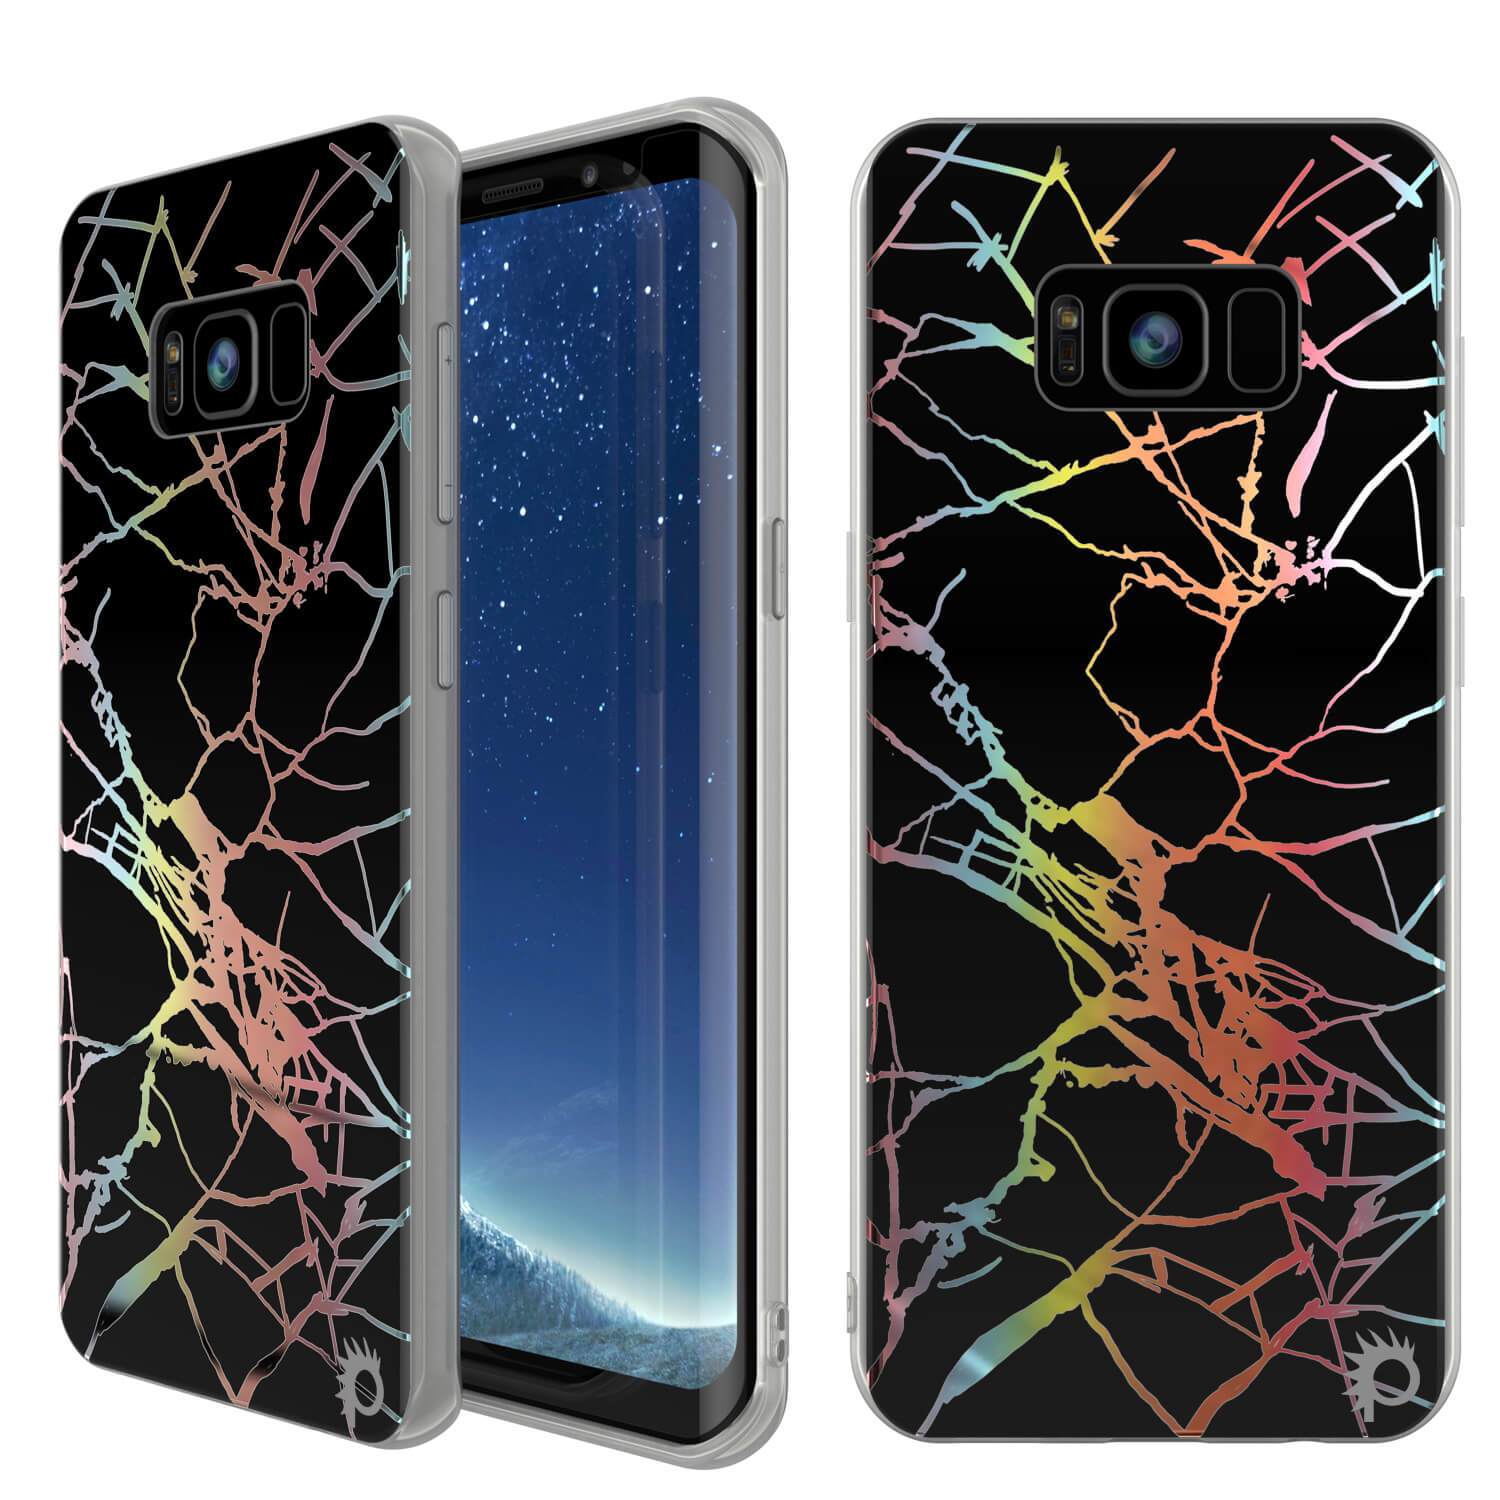 Punkcase Galaxy S8 Marble Case, Protective Full Body Cover W/PunkShield Screen Protector (Black Mirage) (Color in image: Black Mirage)